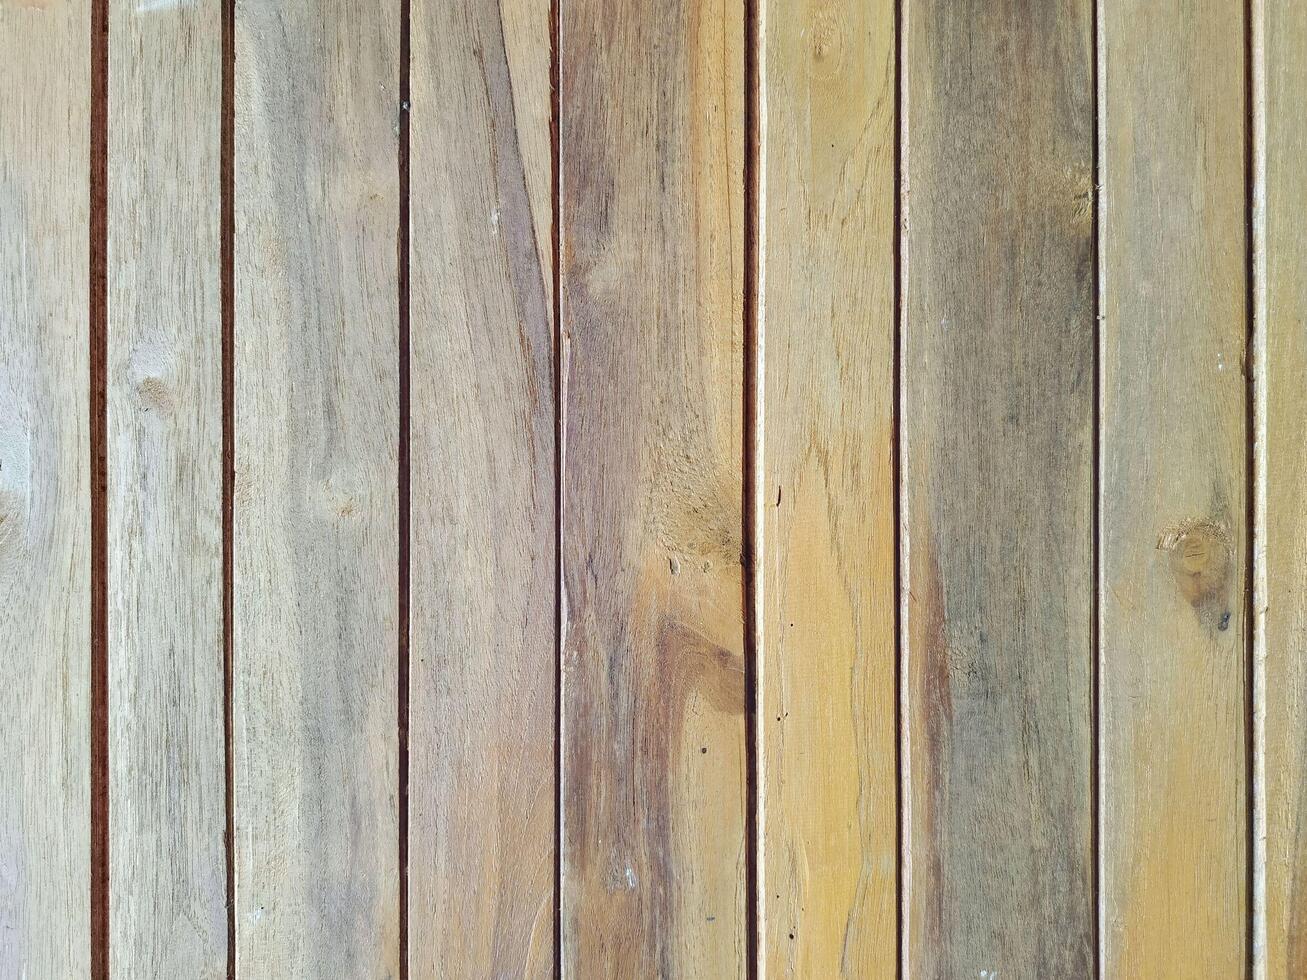 beautiful old wood texture. Can be used as background, wallpaper, backdrop, cover photo